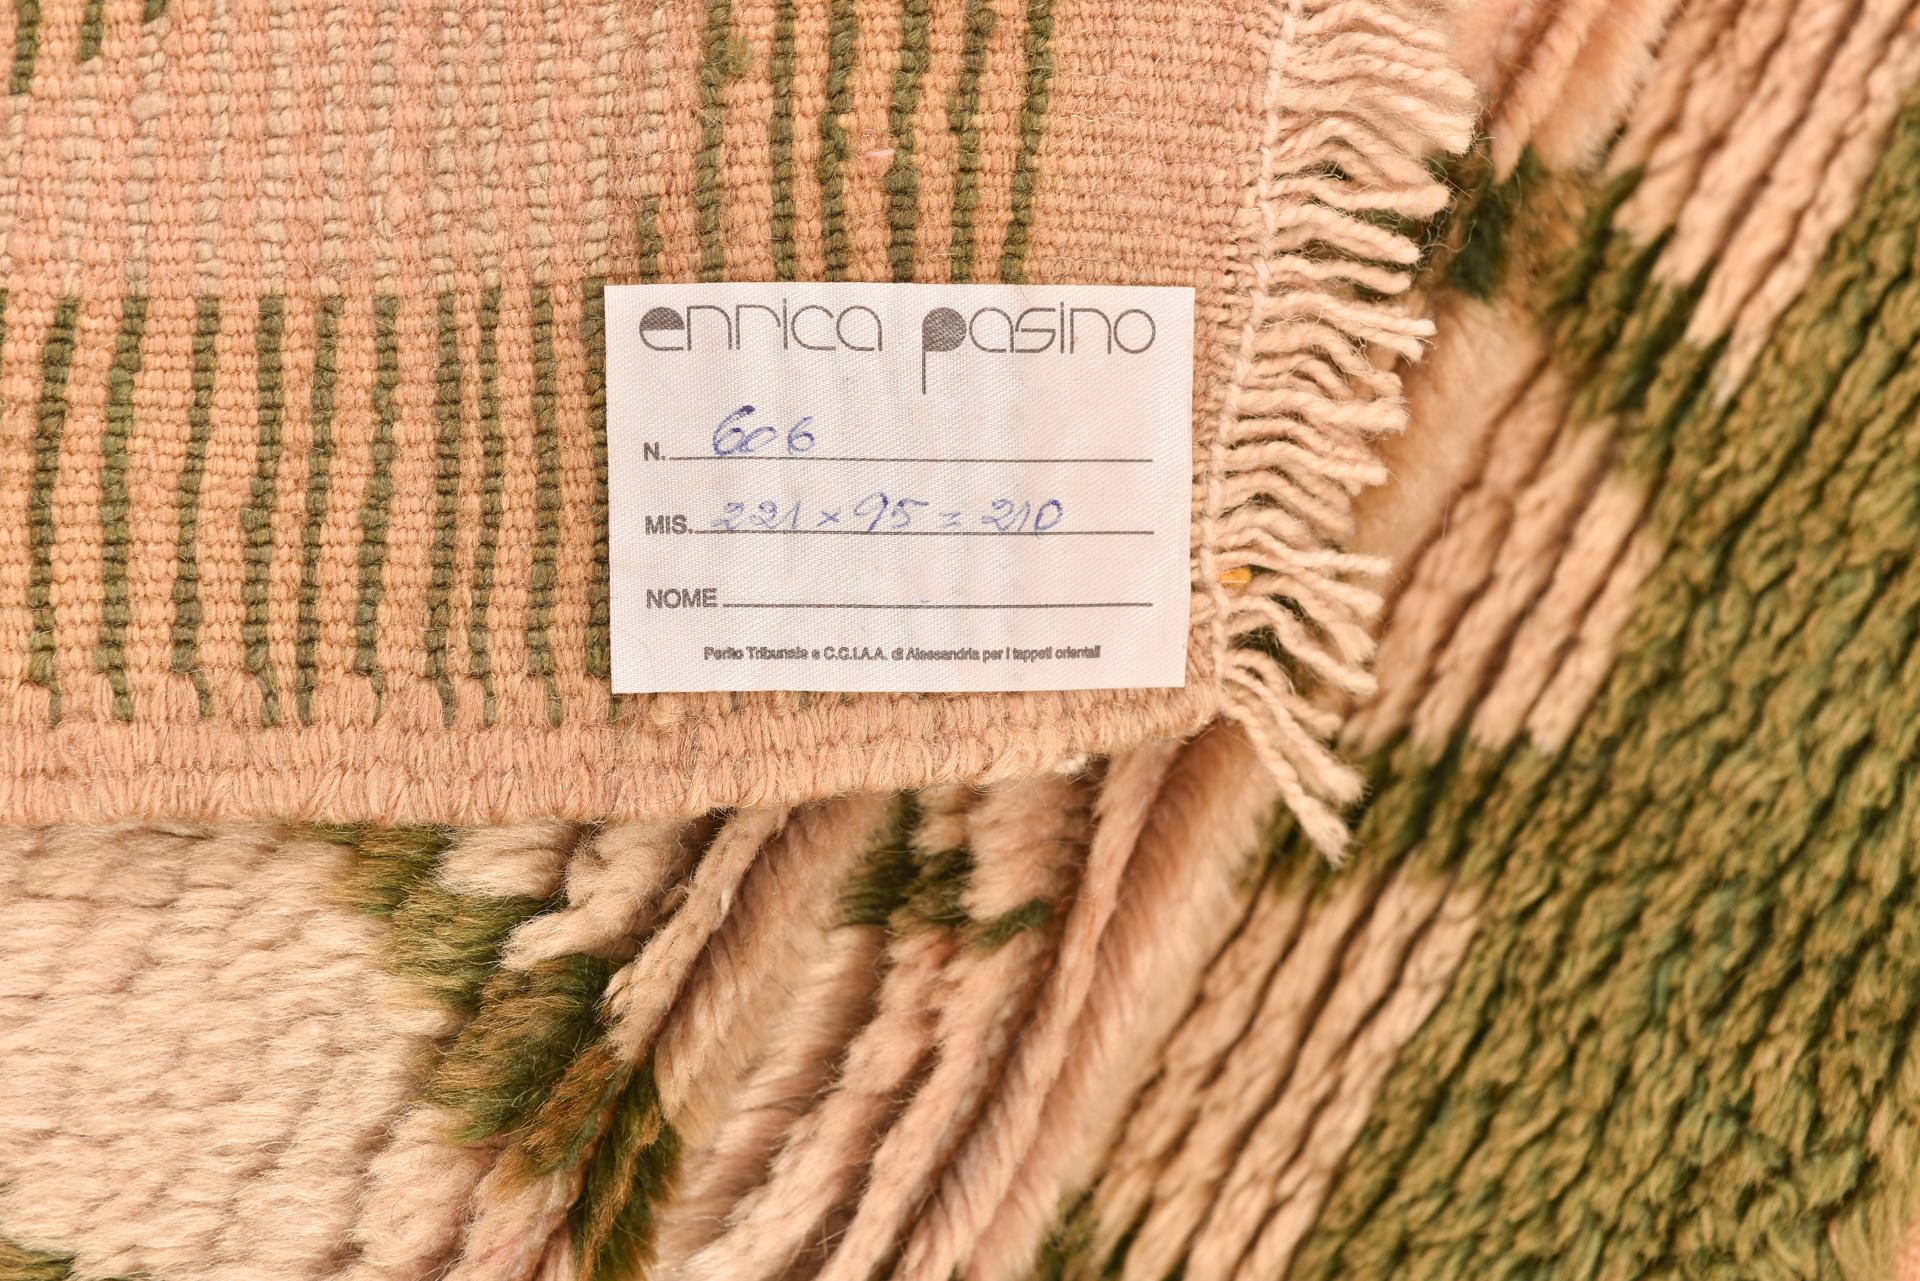 nr. 606 -  Old Turkish carpet, very pleasant for quality, colors and design: a simple grass green trellis on a cream background.
It's soft and welcoming, even on a sofa.
That's a good price also, because I want to close activities.